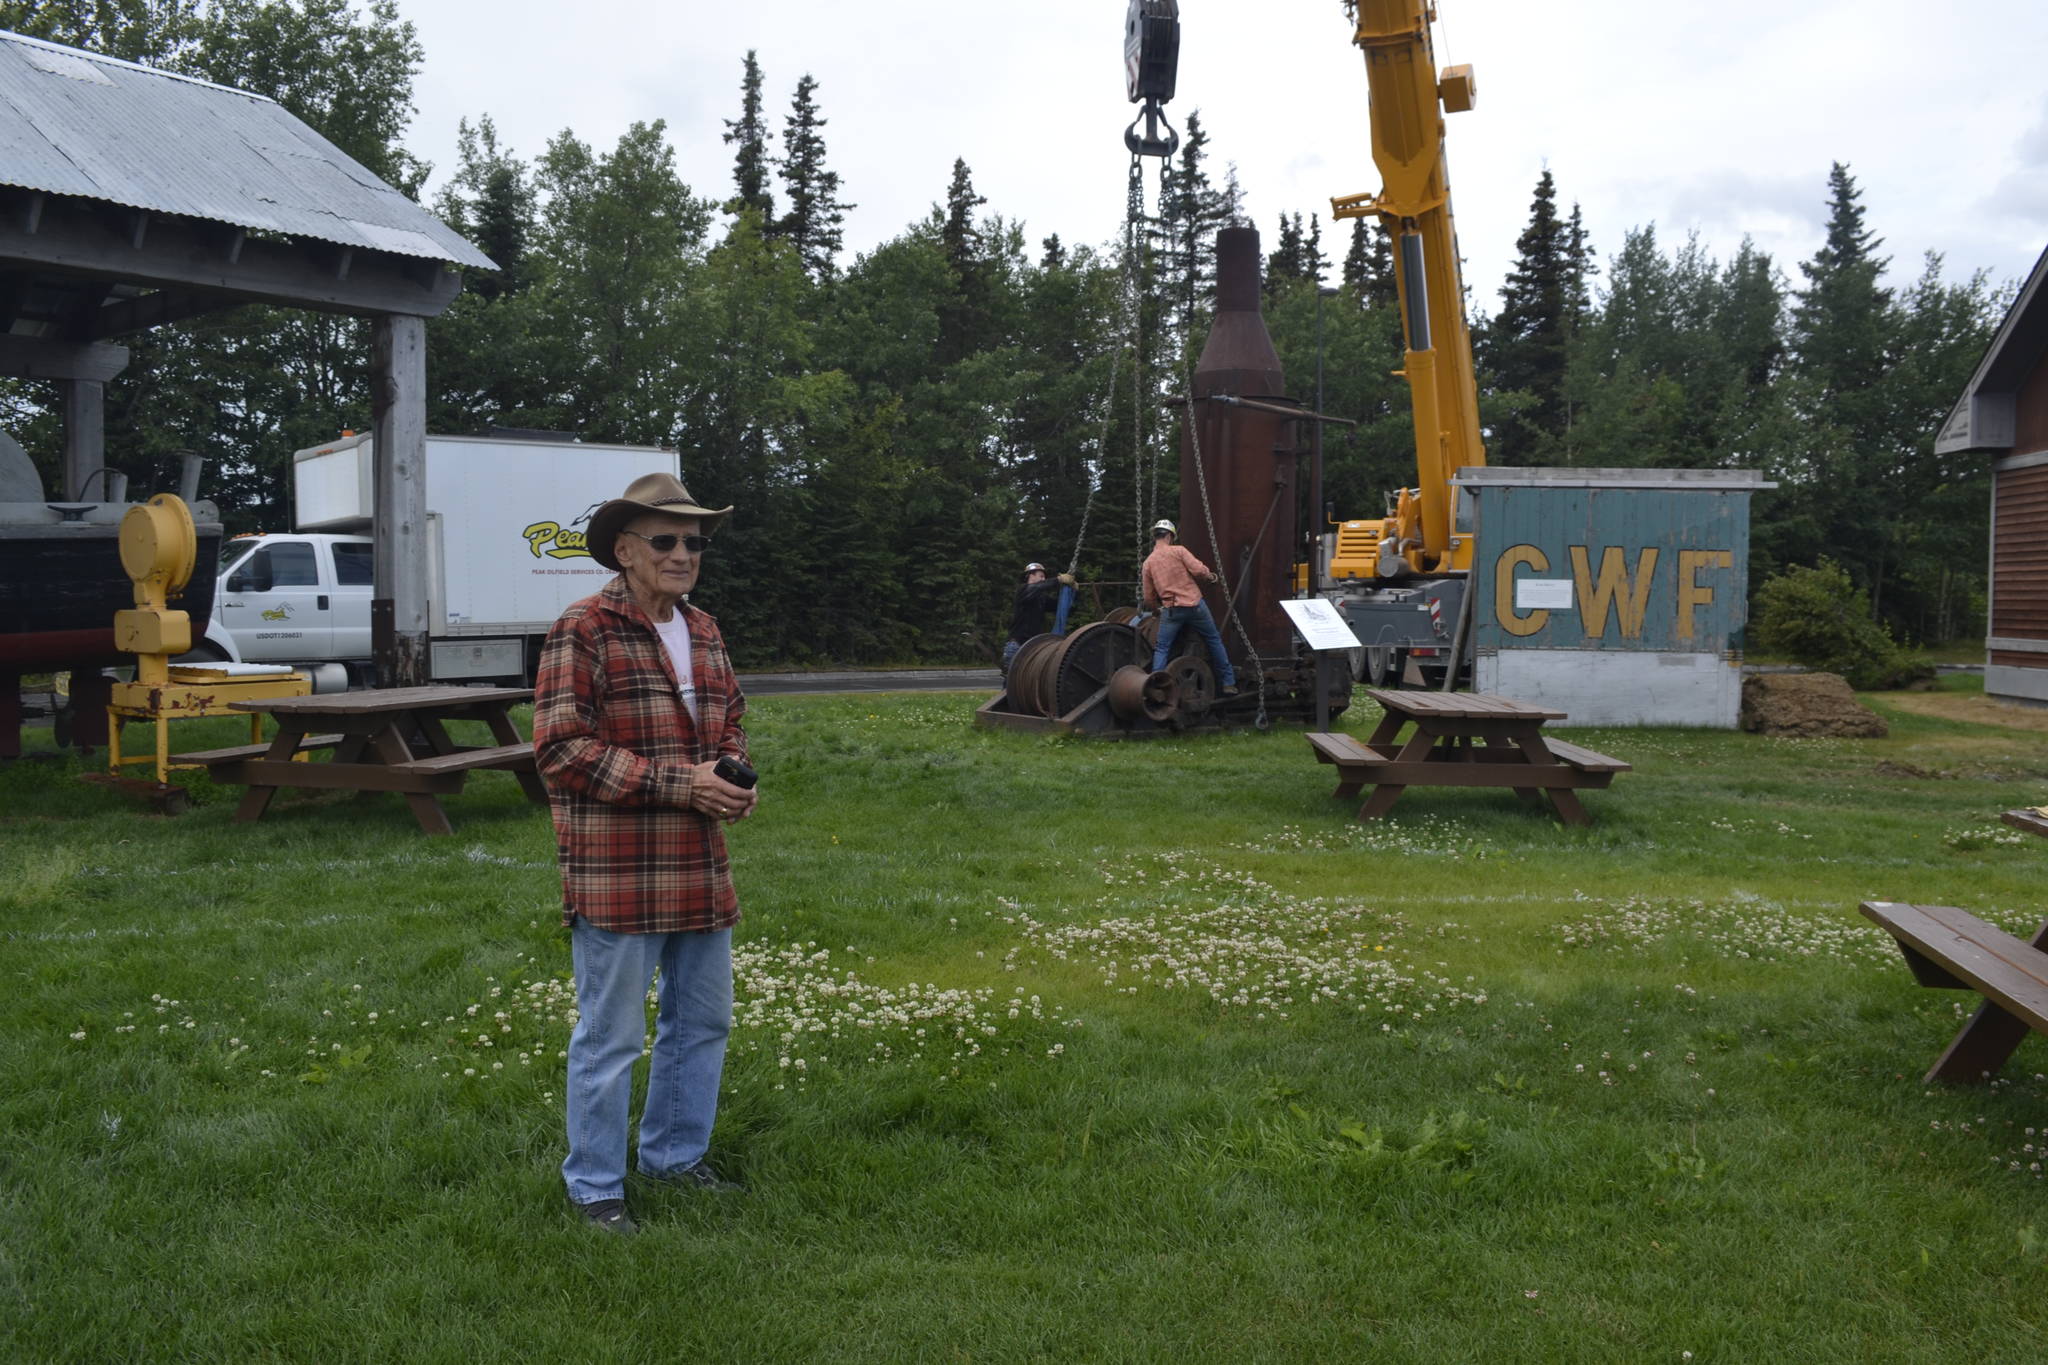 Dr. Peter Hansen stands in front of crane operators who are in the process of lifting an antique steam donkey engine at the Kenai Visitor and Cultural Center, where it will be relocated on the lawn to make room for a cabin that will act as a Kenai Bush doctors museum, Monday, July 15, 2019, in Kenai, Alaska. (Photo by Victoria Petersen/Peninsula Clarion)